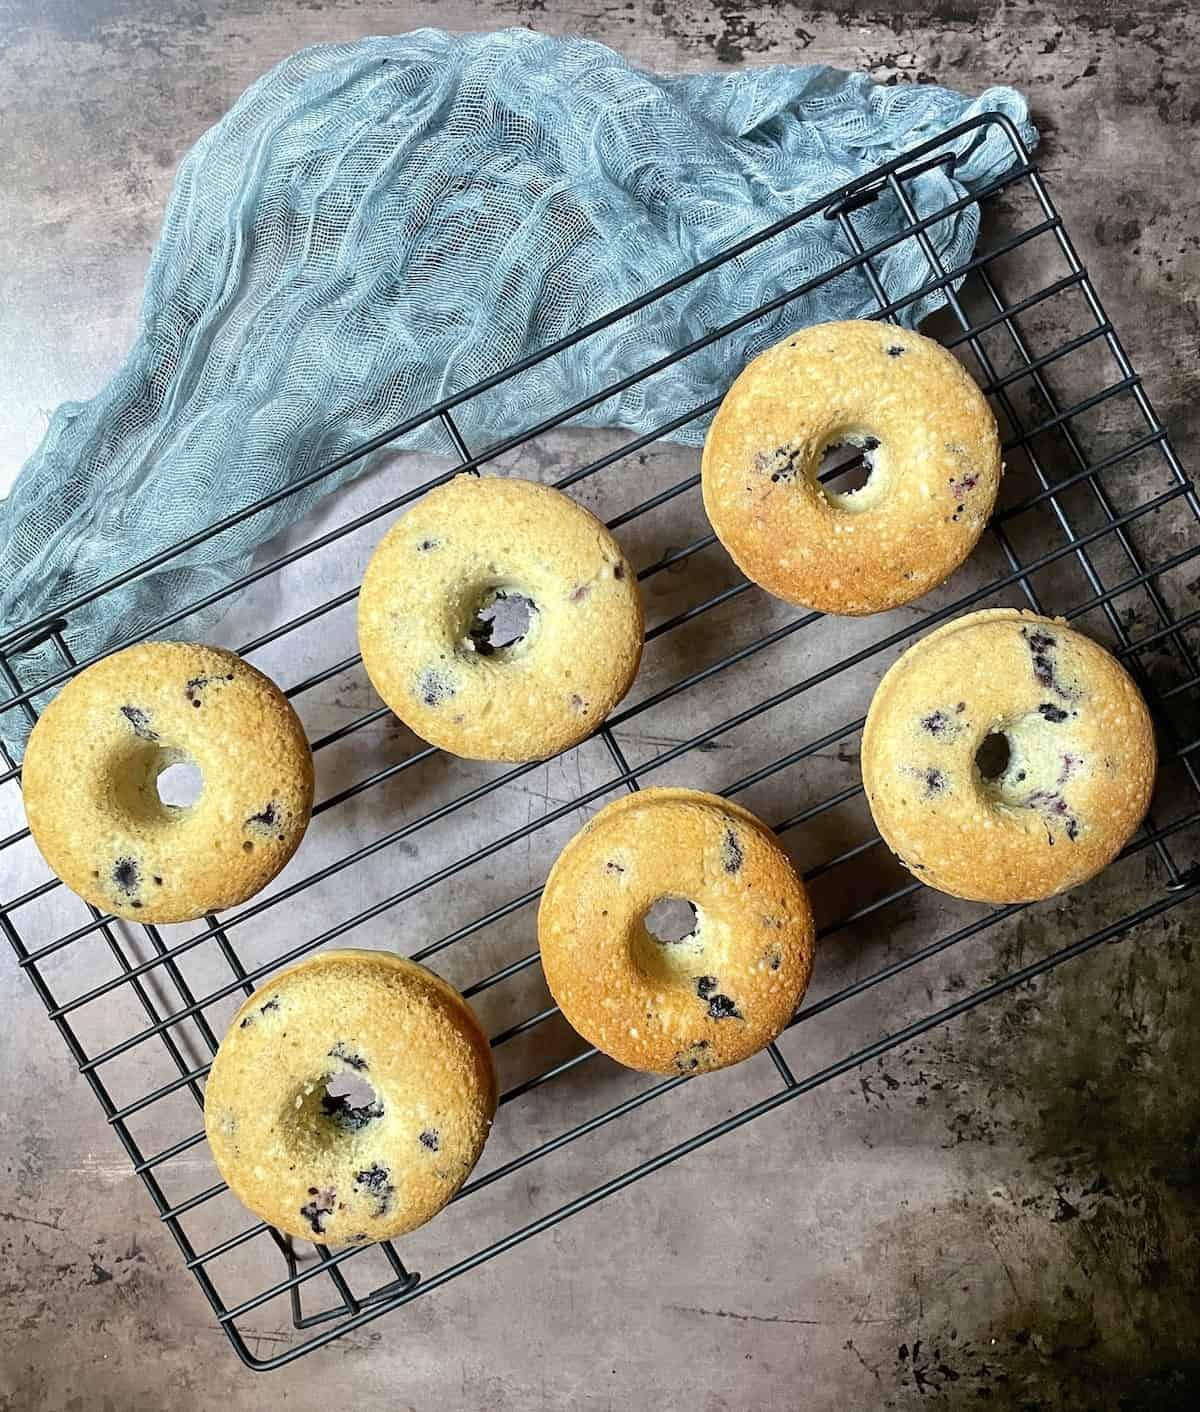 Baked blueberry cake donuts on a wire rack on a table with a blue cloth.